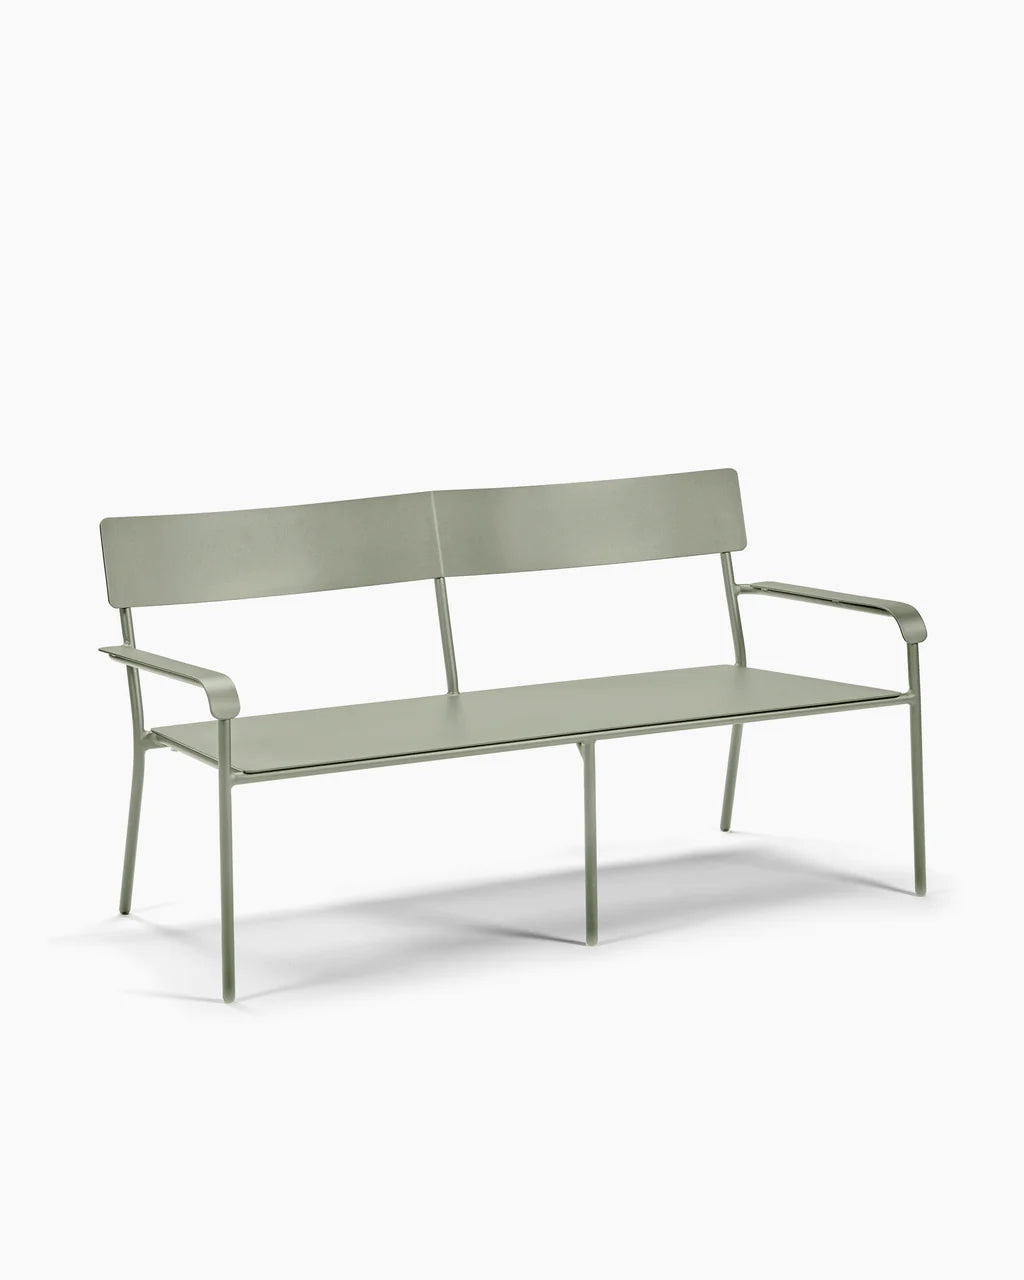 Two seater aluminum August